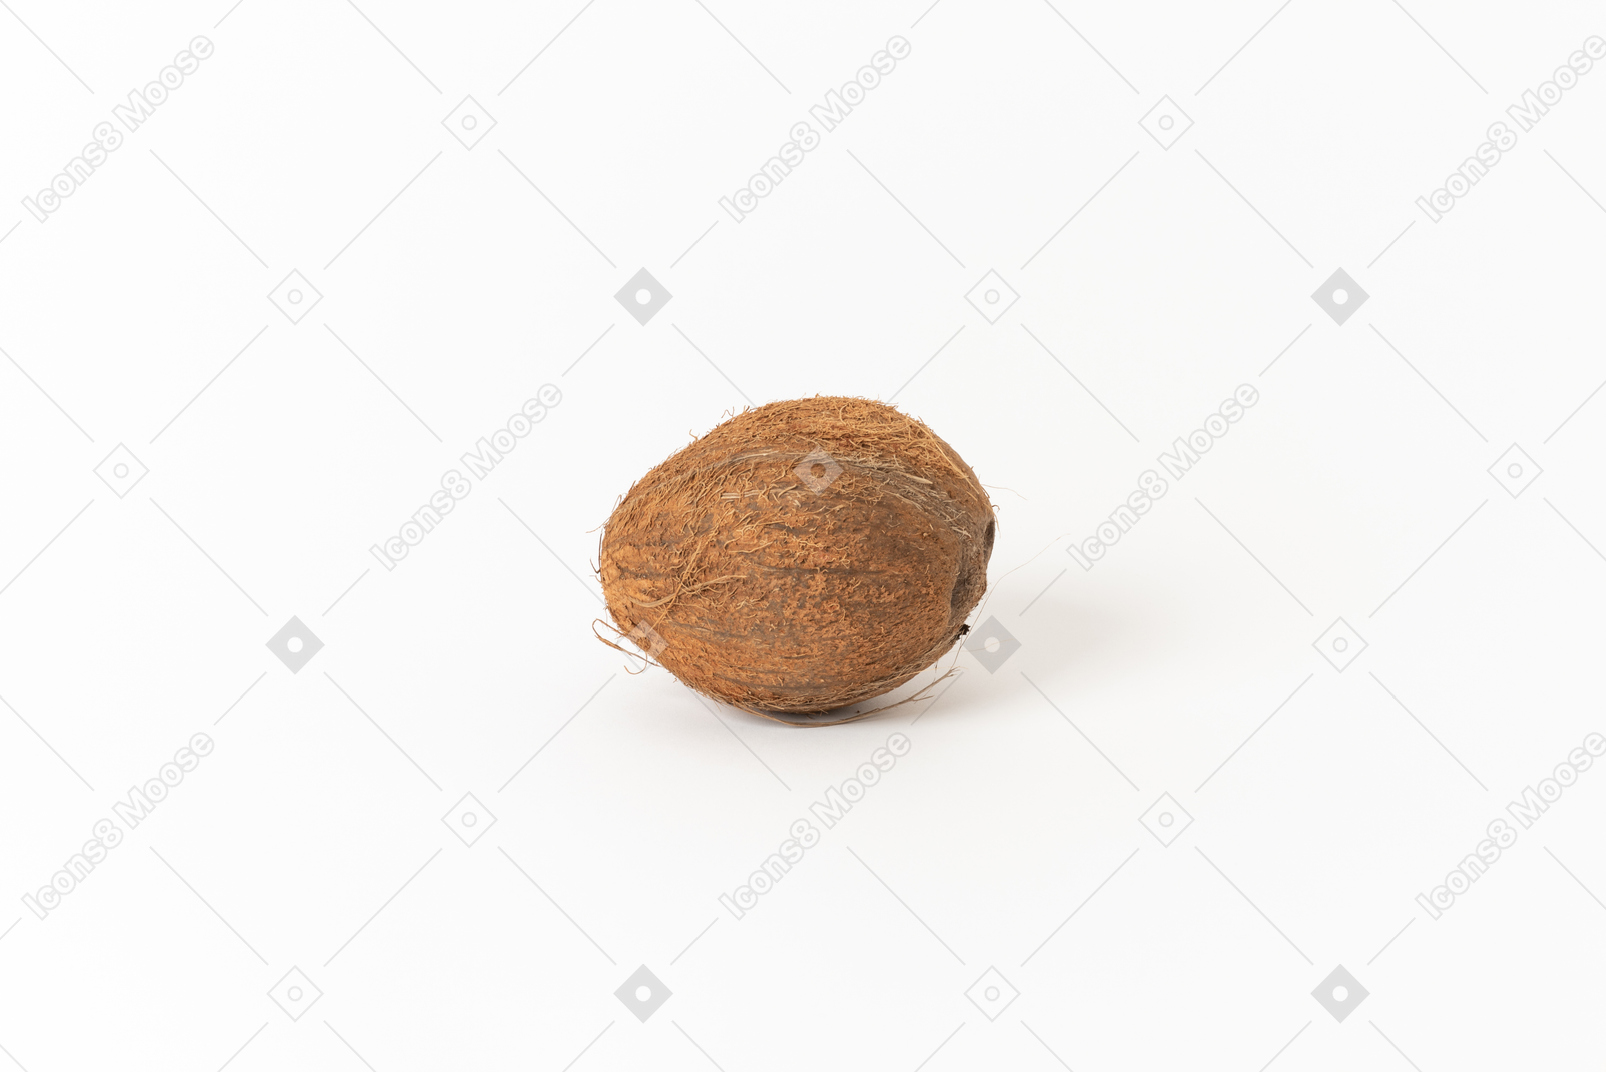 Just a coconut